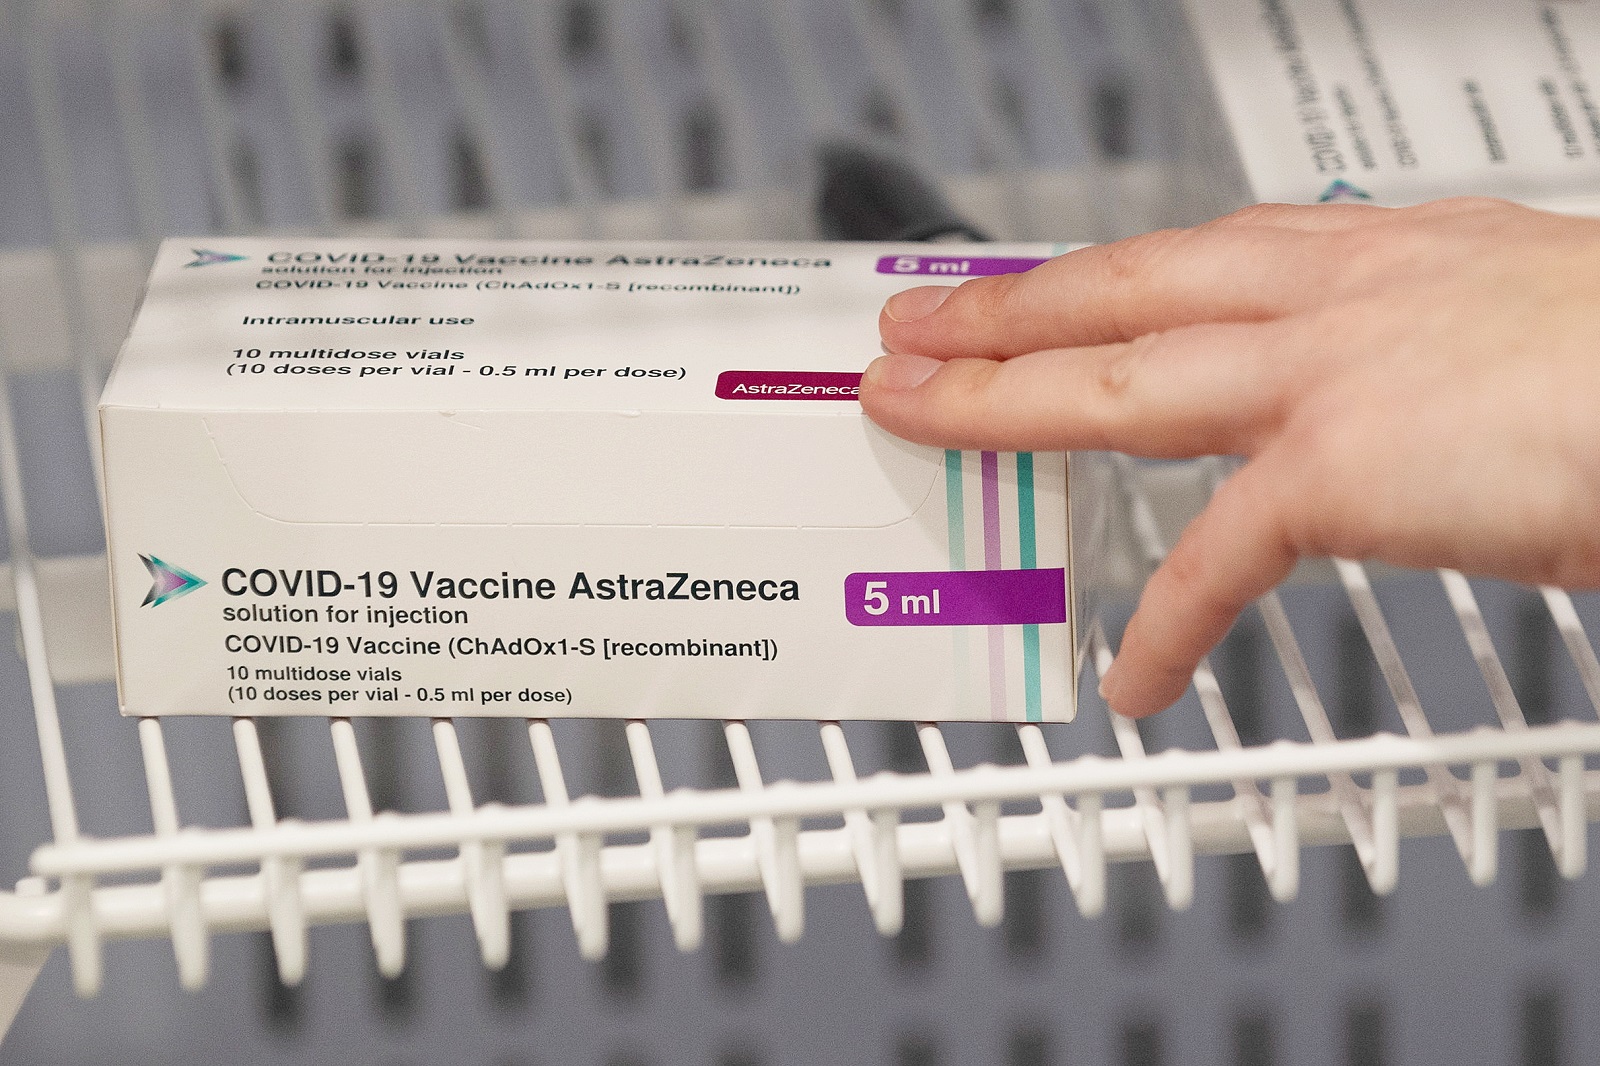 epa08968294 (FILE) - The Covid-19 AstraZeneca Covid-19 vaccine in a refrigerator at Robertson House in Stevenage, Hertfordshire, Britain, 11 January 2021 (reissued 27 January 2021). BAstraZeneca has rejected EU's criticism of its vaccine rollout process, after the company had announced delays in delivering the agreed doses to the bloc.  EPA/JOE GIDDENS / POOL *** Local Caption *** 56613507